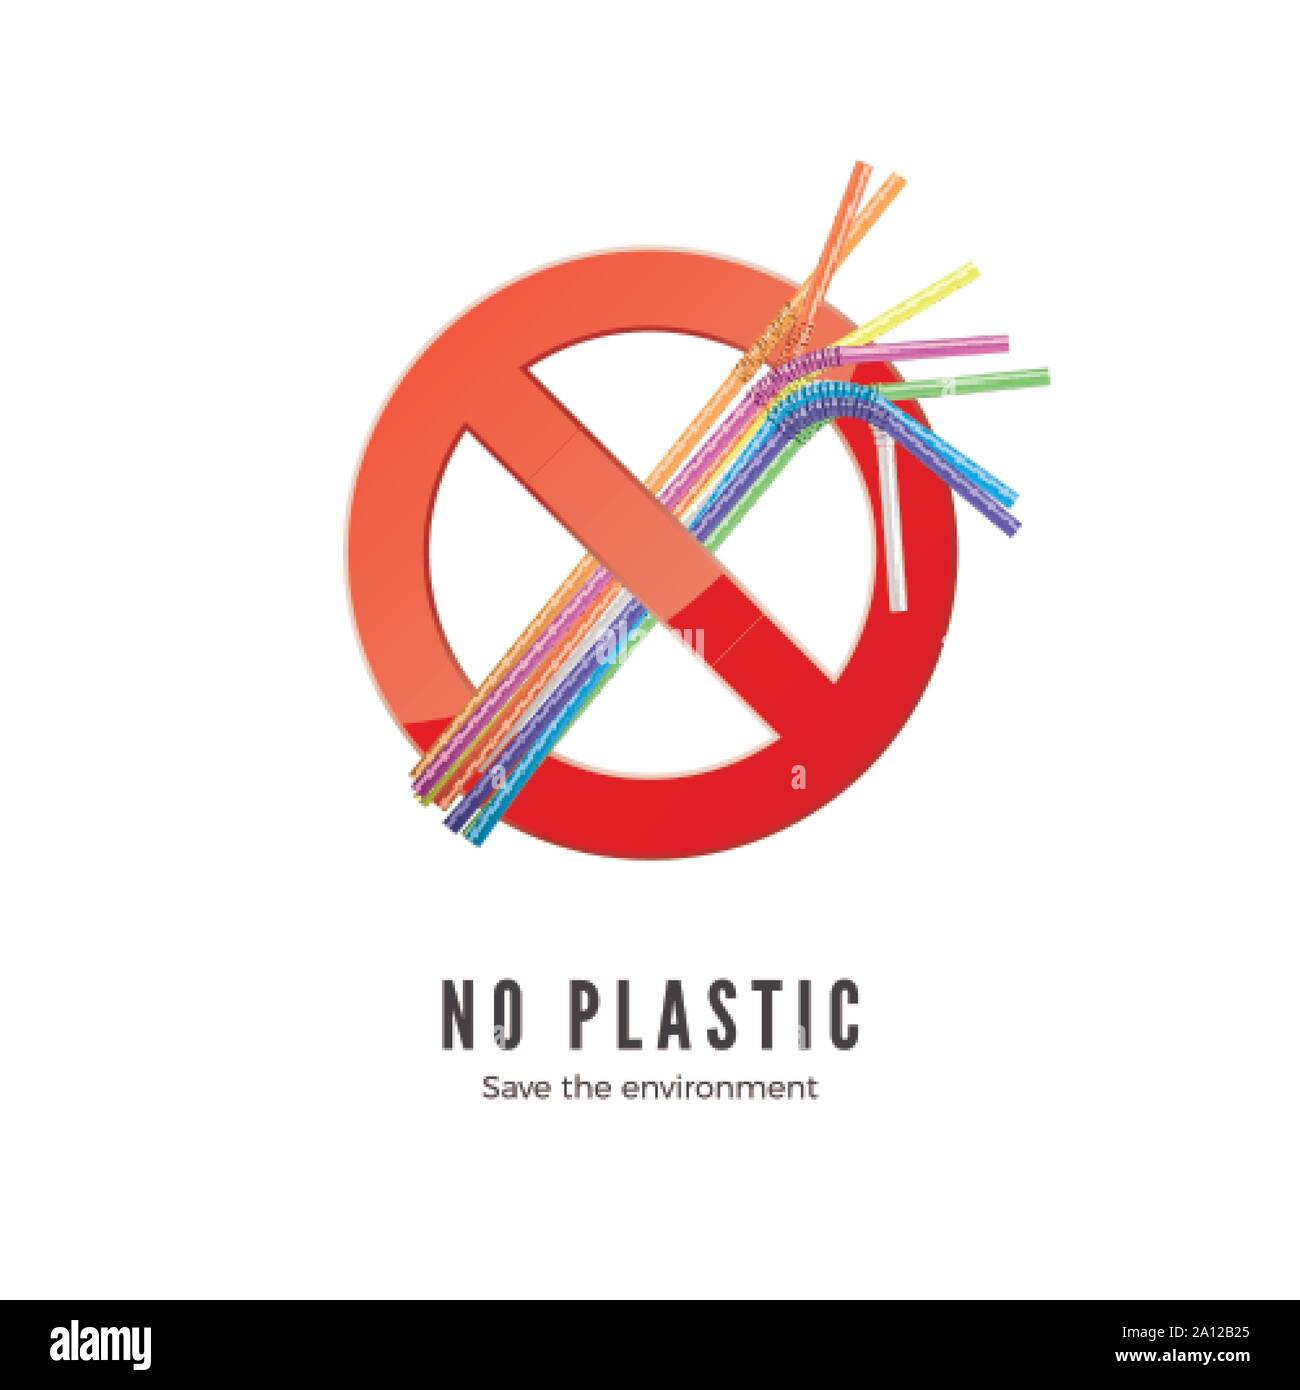 No Plastic Straws. Save environment banner. Protect nature icon. Vector illustration Stock Vector